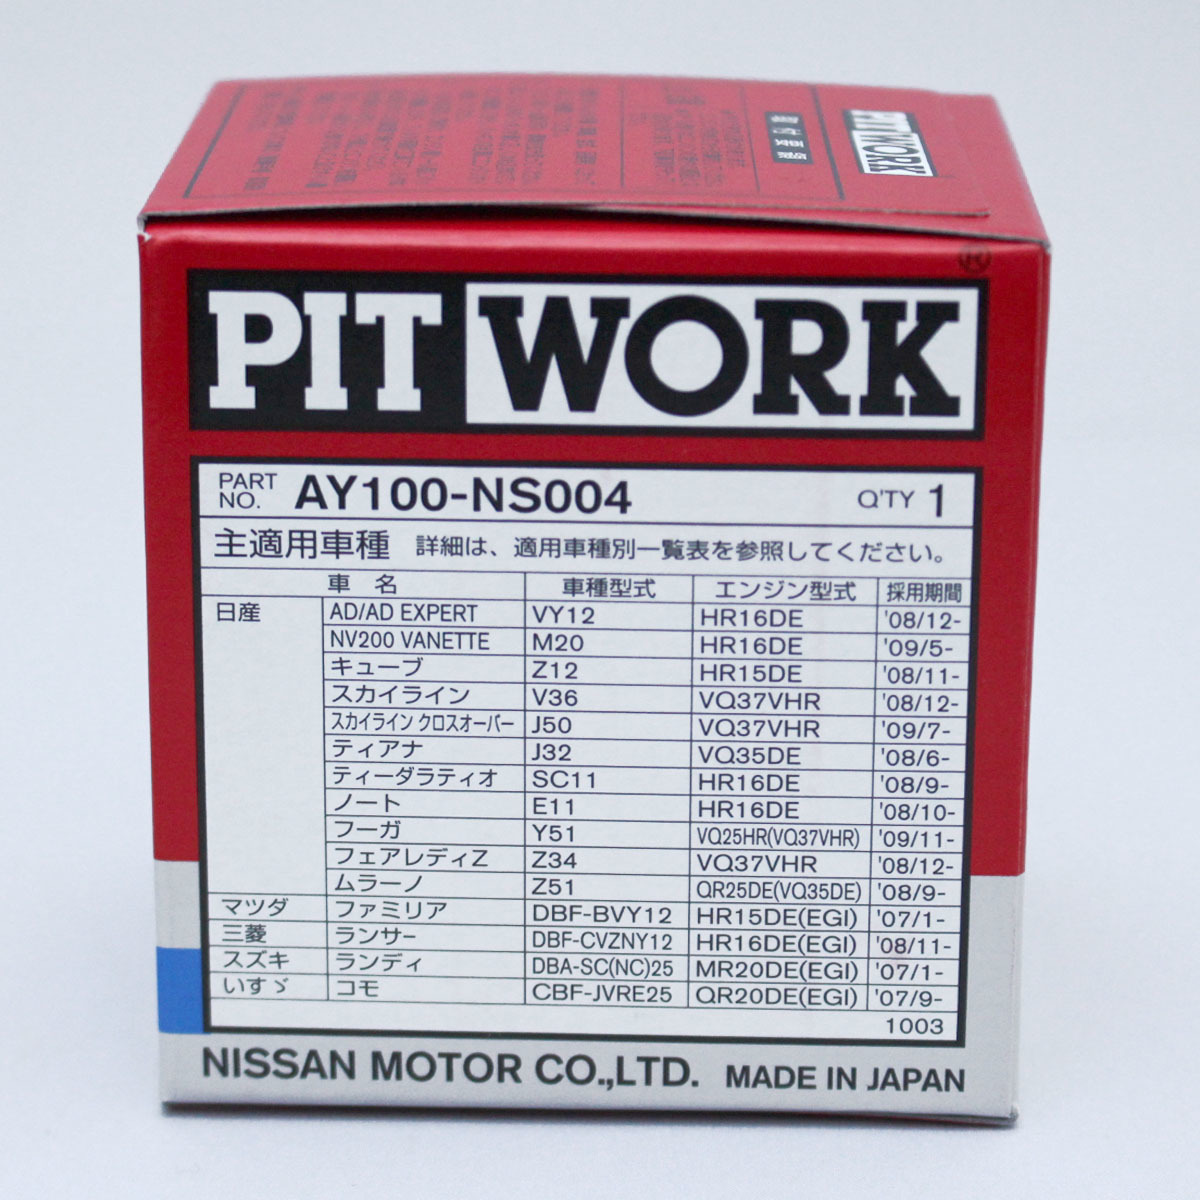 dd#5 piece set AY100-NS004pito Work PITWORK oil filter oil element ( Okinawa prefecture Area is delivery un- possible )